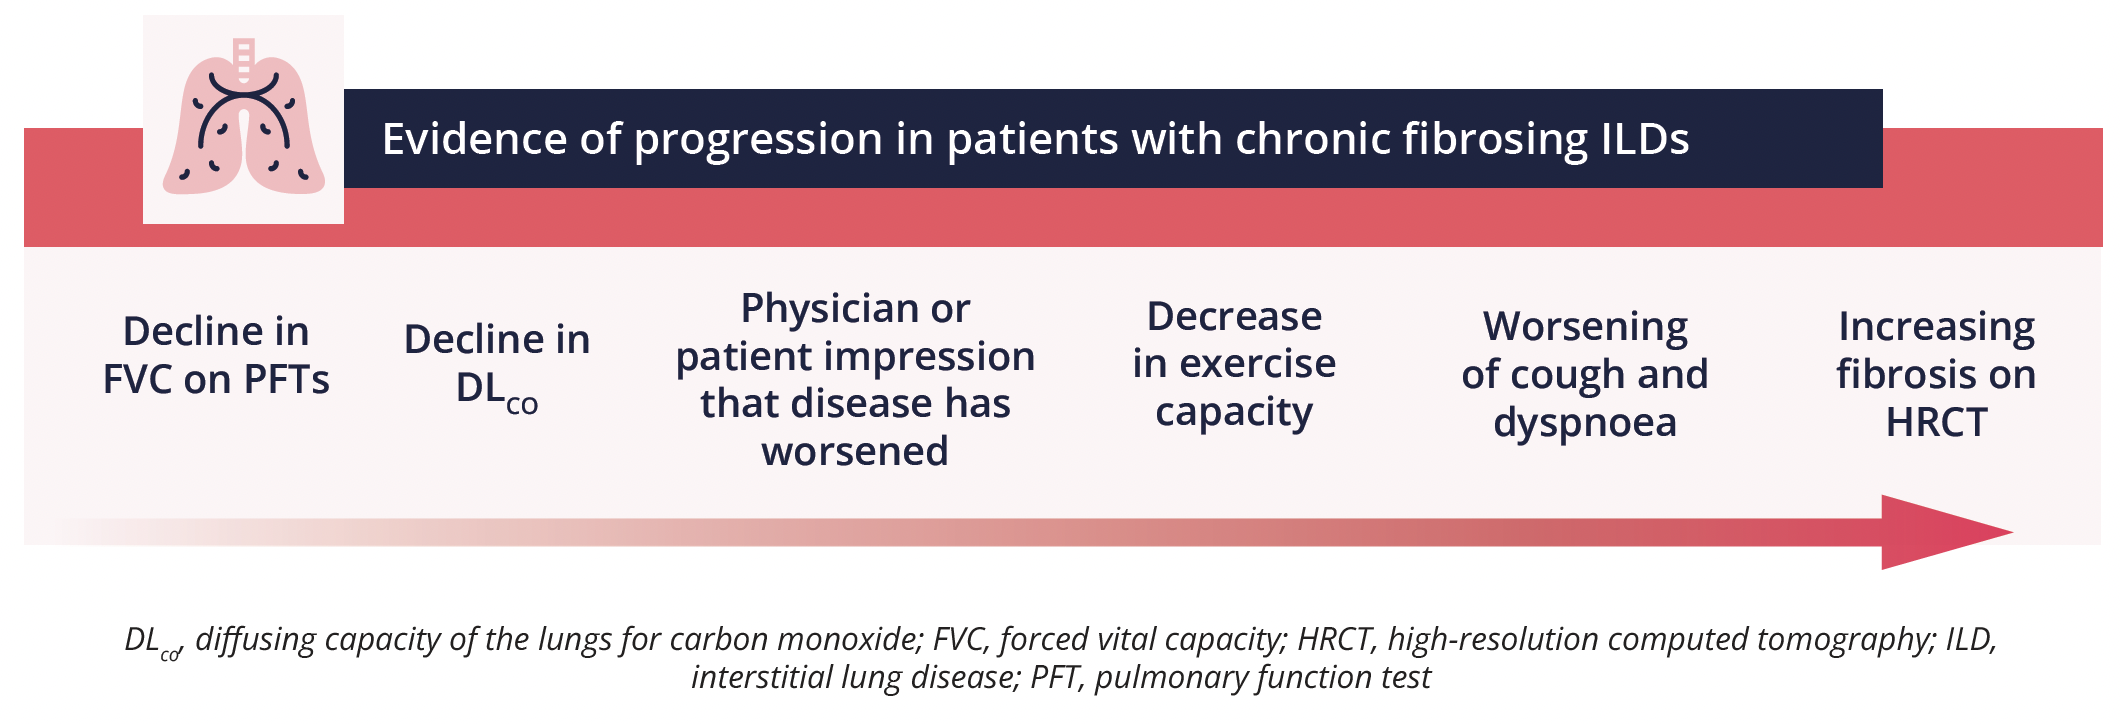 evidence-of-progression-in-patients-with-chronic-fibrosing-ILDs